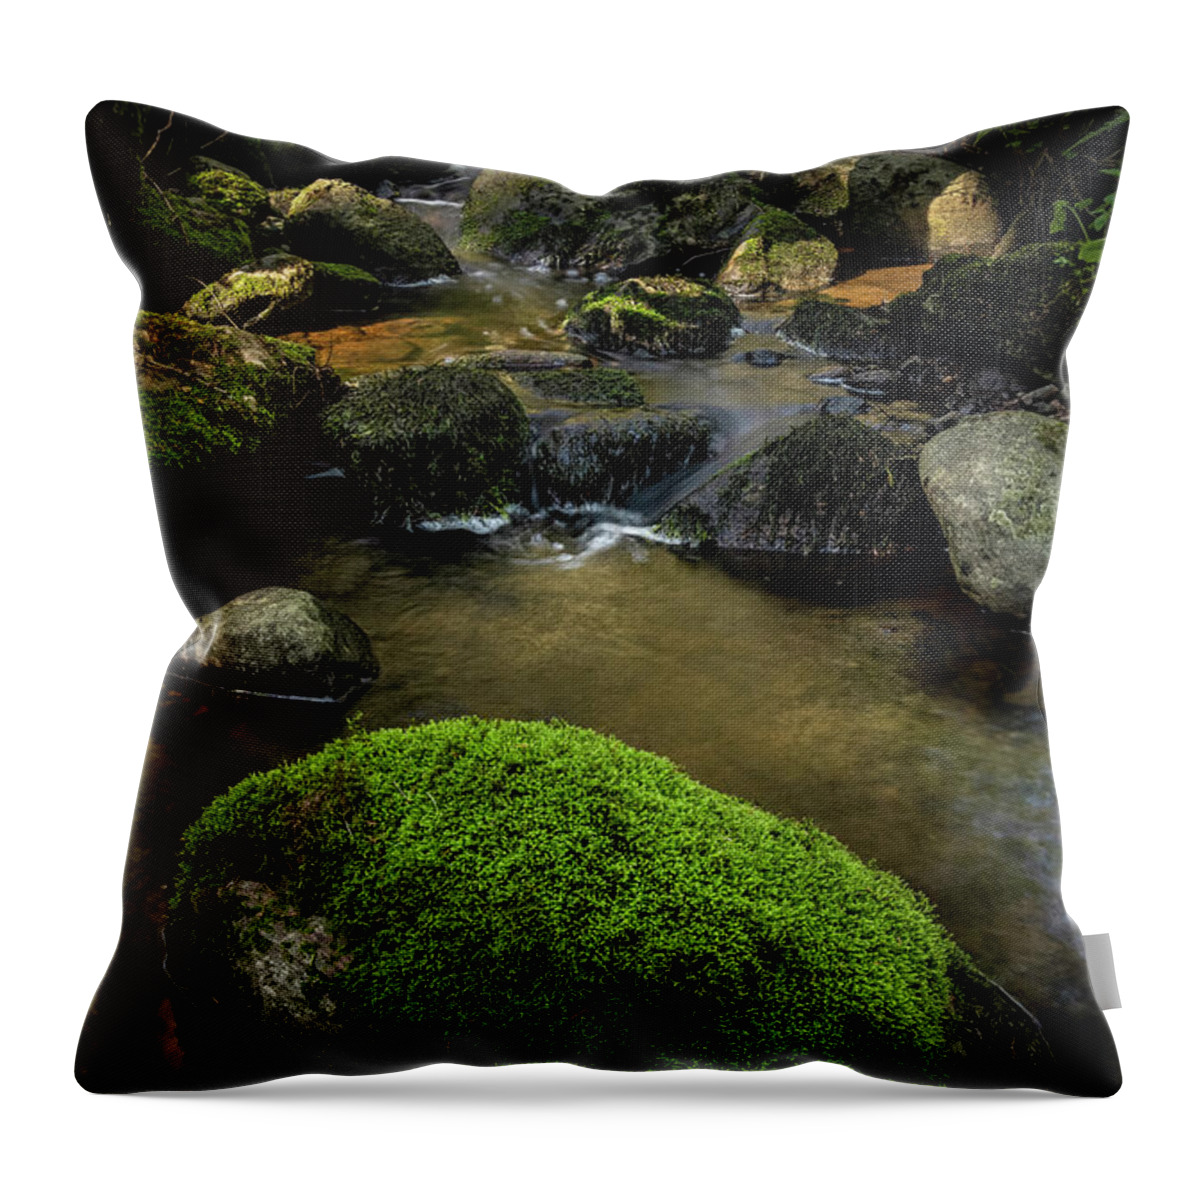 Forest Throw Pillow featuring the photograph Forest Creek by Nicklas Gustafsson